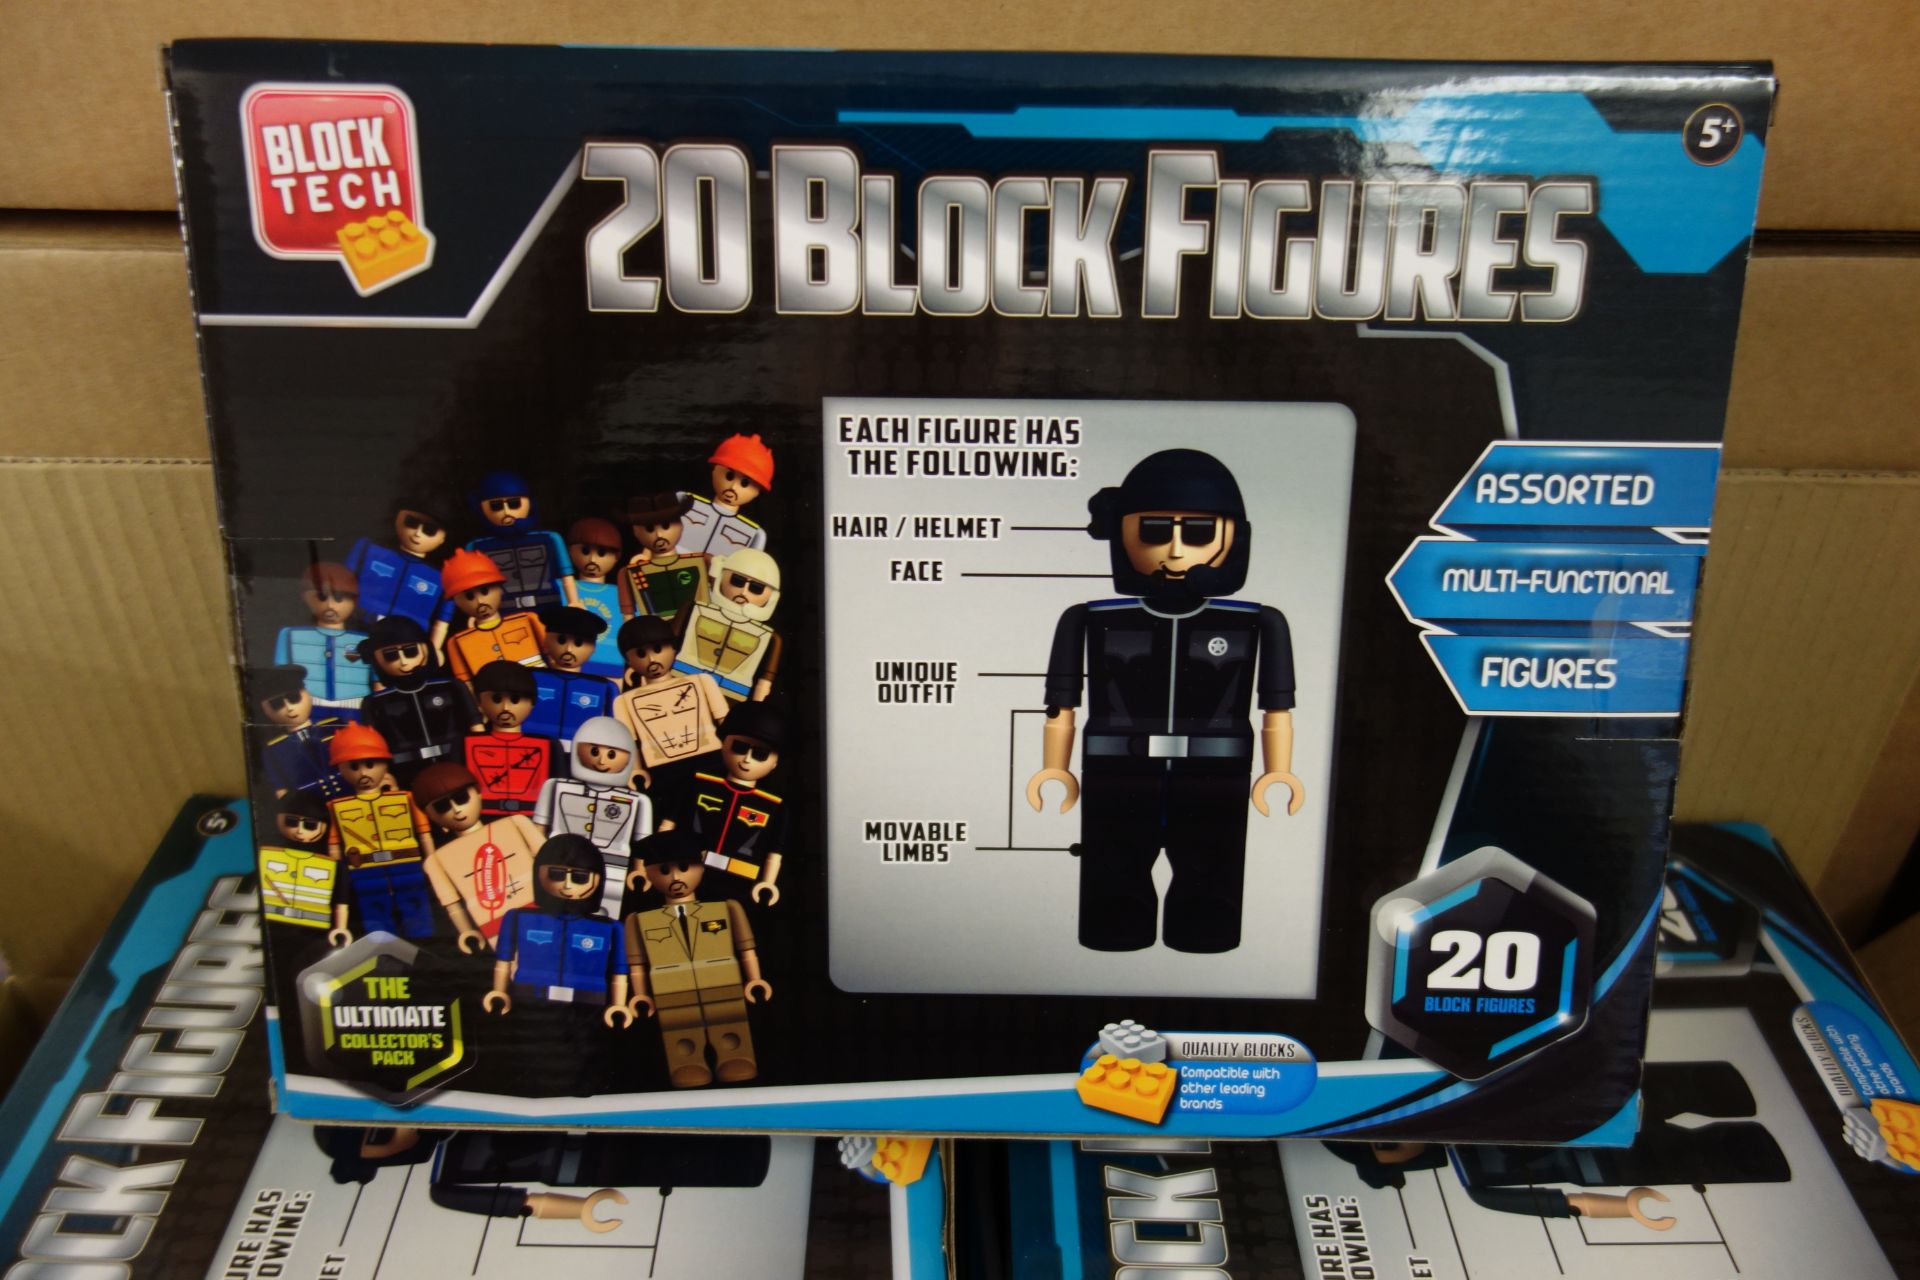 28 x Brand New - Block Tech 20 Block Figure's Set's - The Ultimate Collectors Pack. - Image 2 of 2